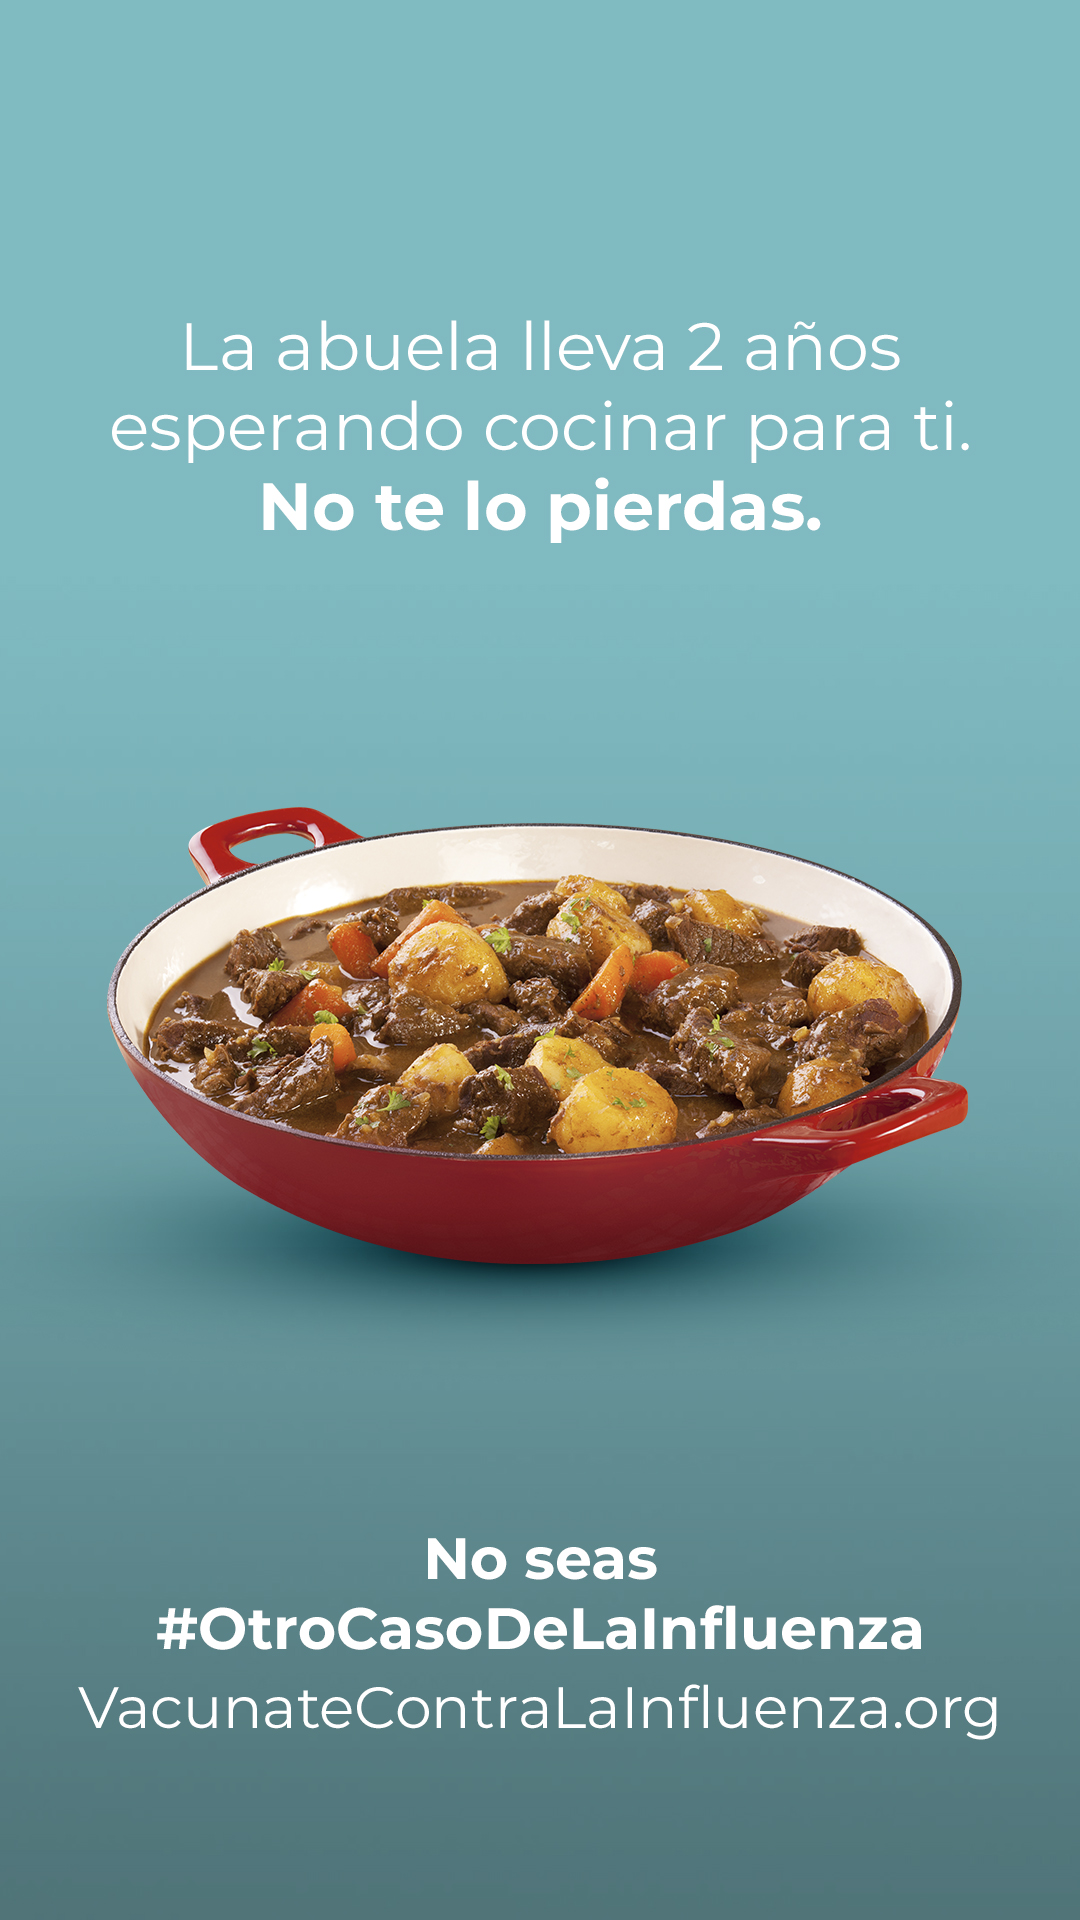 Teal background with white text in Spanish and an image of beef stew. Hashtags and weblinks are at the bottom.